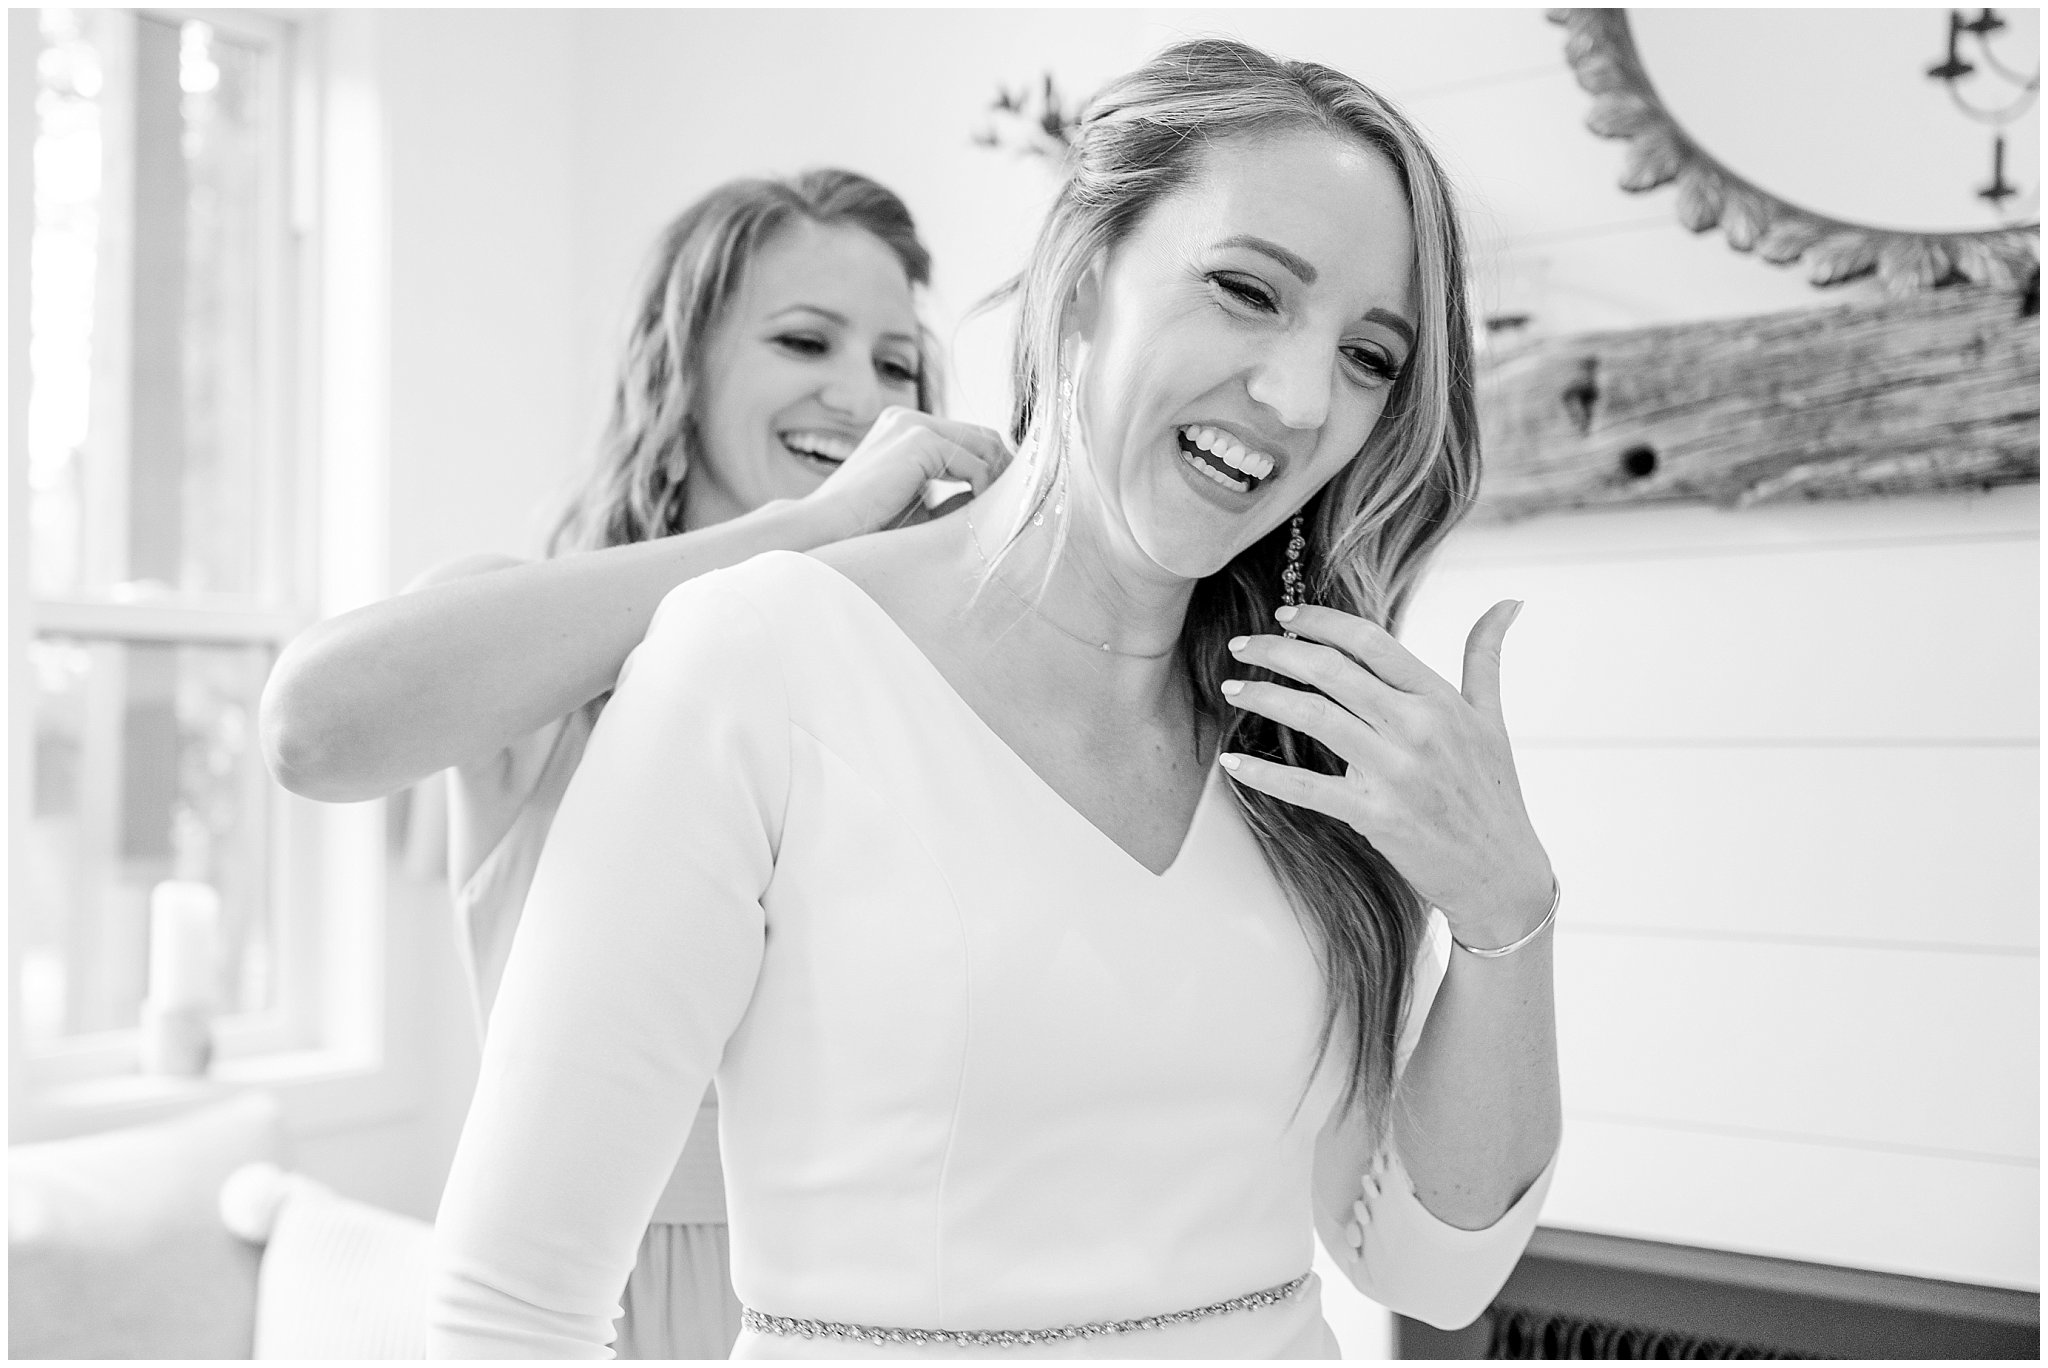 Bride with bridesmaids getting ready inside modern cabin in coral pink dresses | Mountainside Weddings Kalispell Montana Destination Wedding | Jessie and Dallin Photography